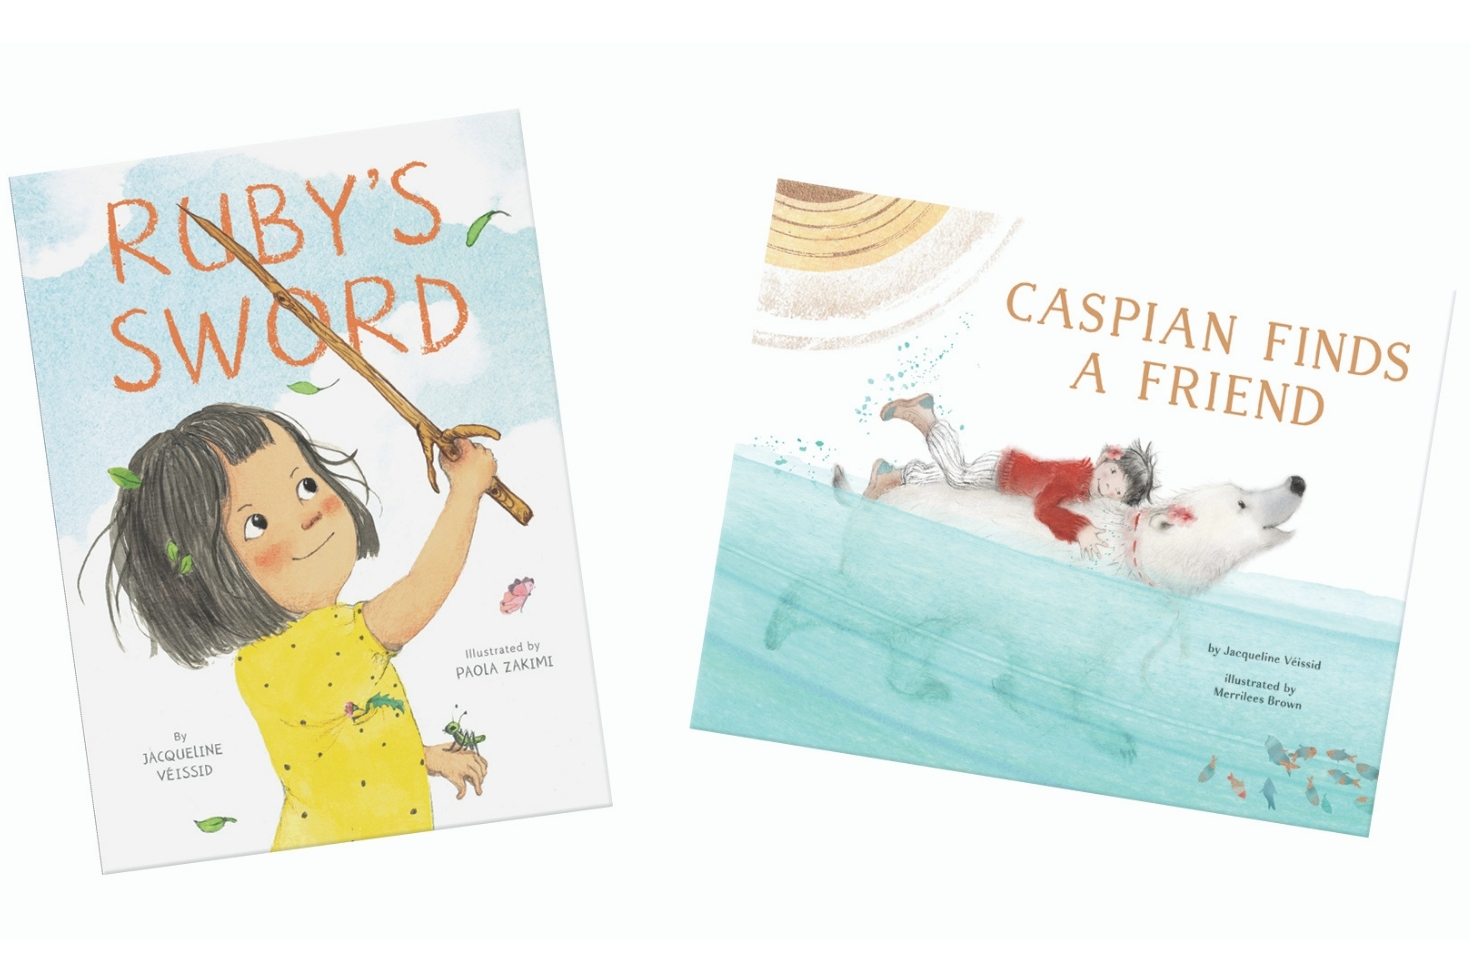 Two children's books "Ruby's Sword" and "Caspian Finds a Friend"